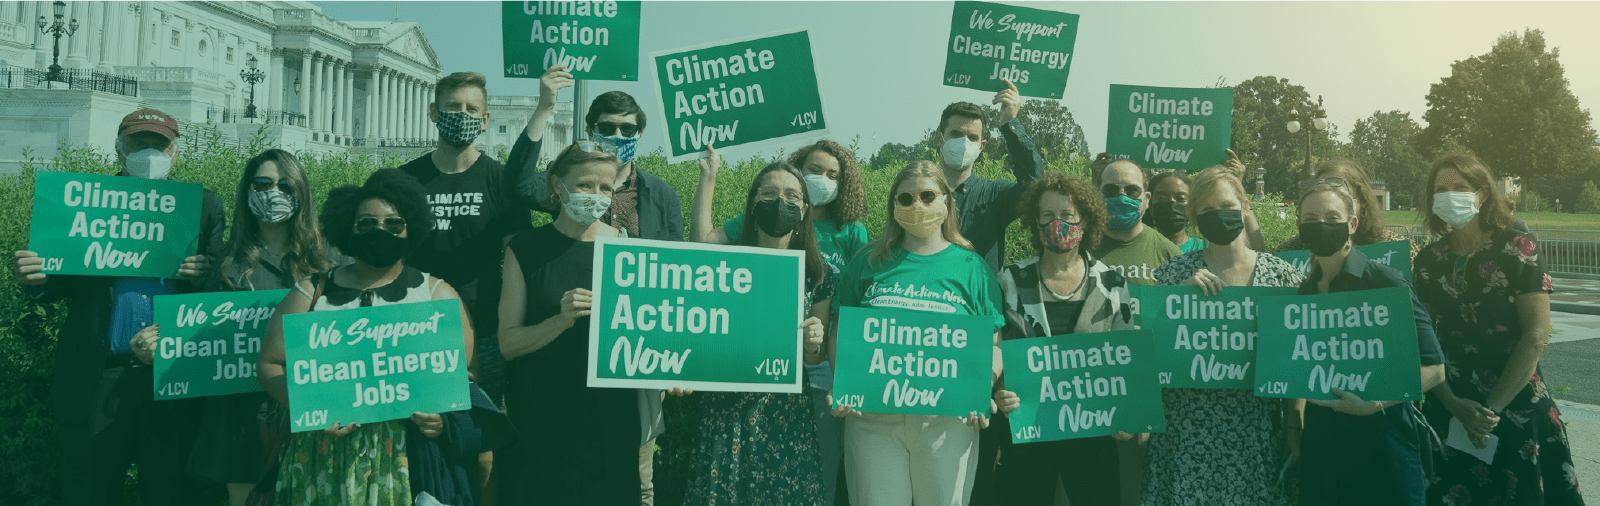 A photo of a group of activists in front of Congress holding "Climate Action Now" signs